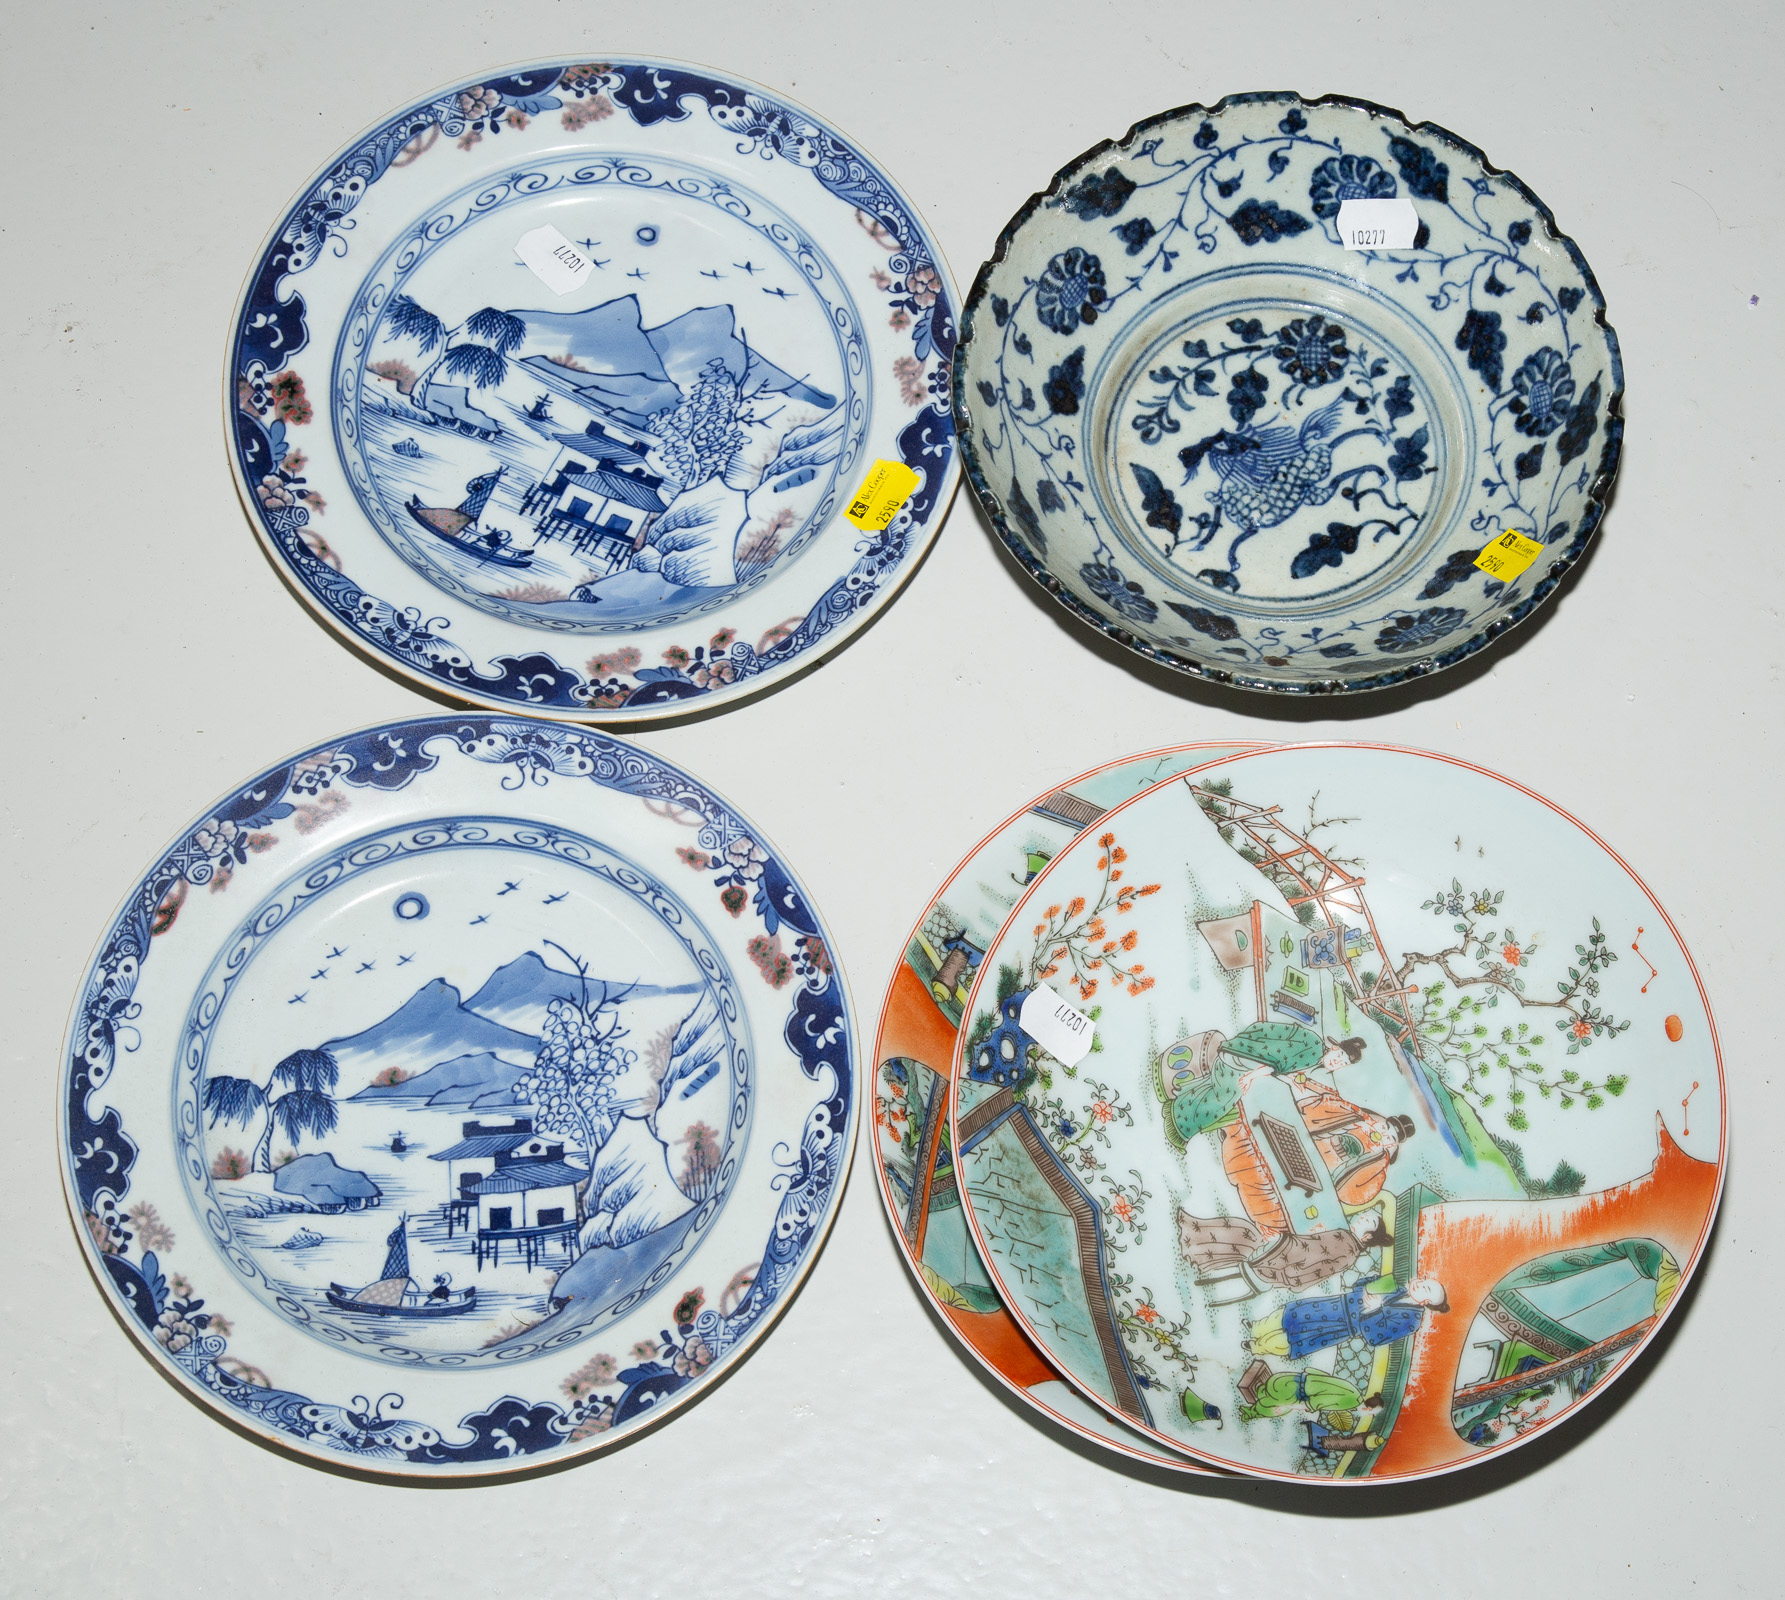 FIVE PIECES OF CHINESE PORCELAIN 3352ac